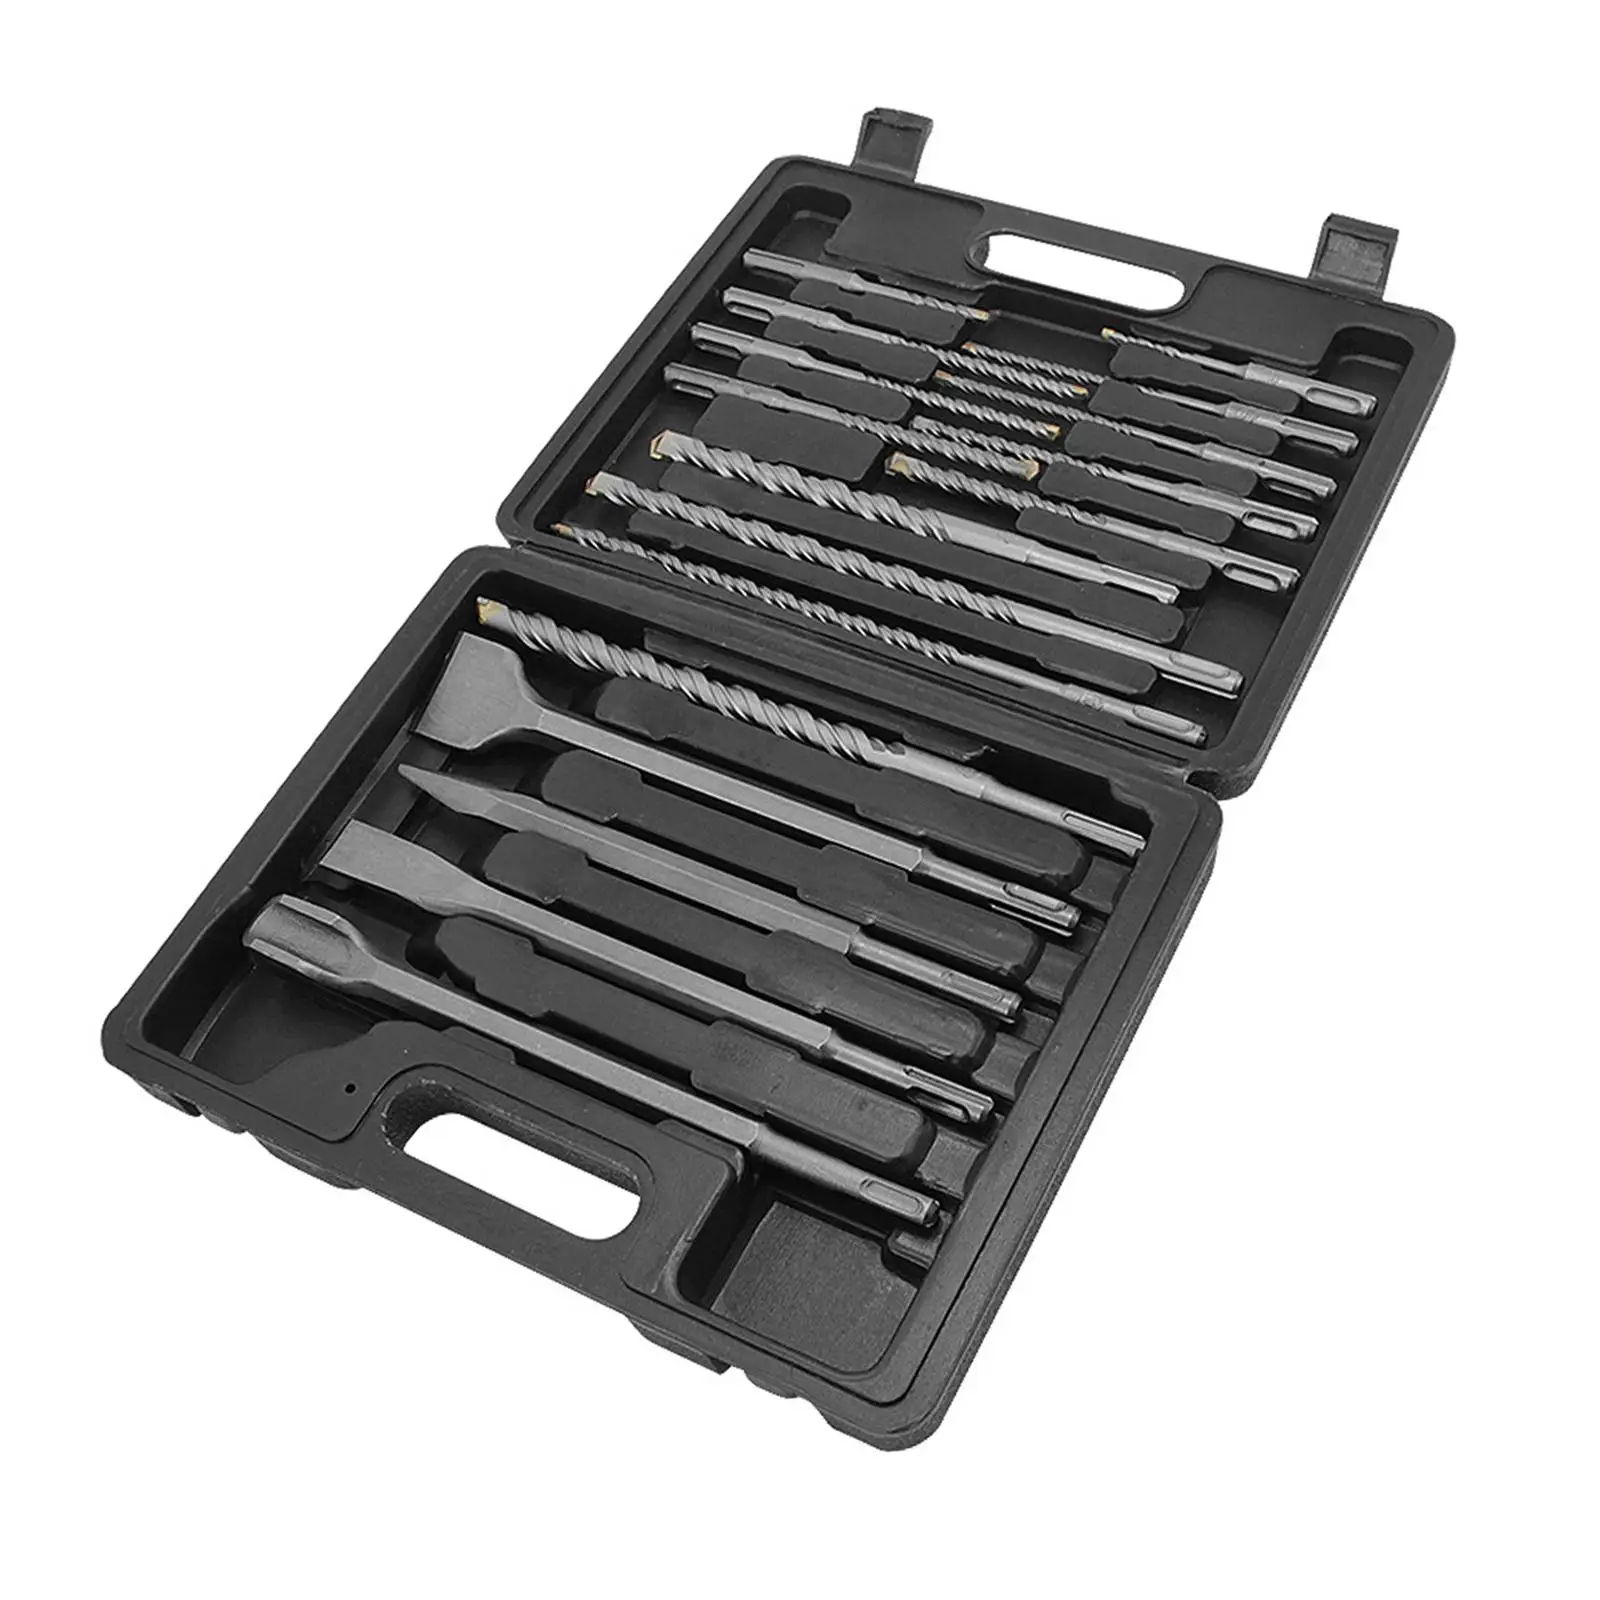 17Pcs Round Shank Masonry Drill Bit Set Woodworking Tool Shovel and Cutter Tools Hammer Drill Bit for Ceramic Glass Tile